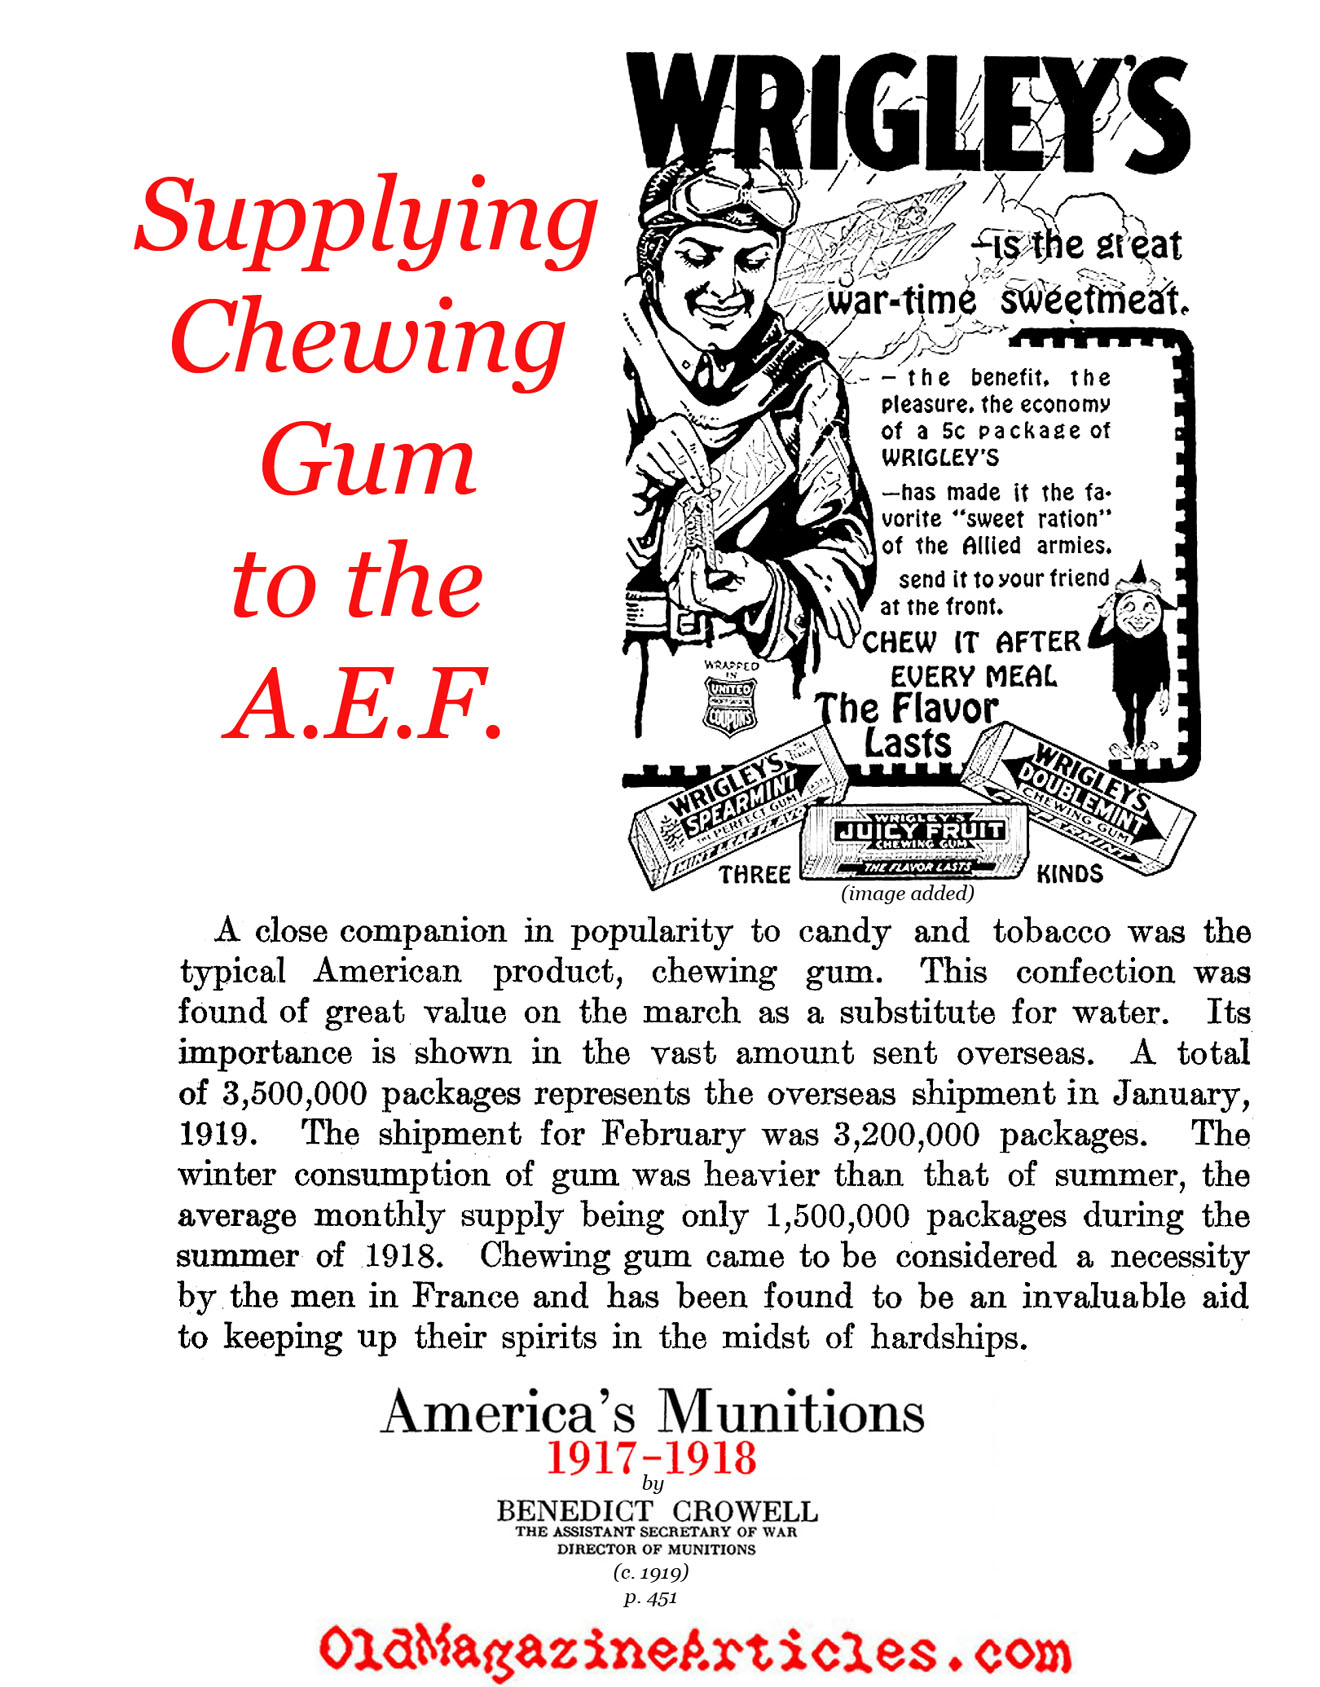 Supplying Chewing Gum to the A.E.F.  (America's Munitions, 1919)